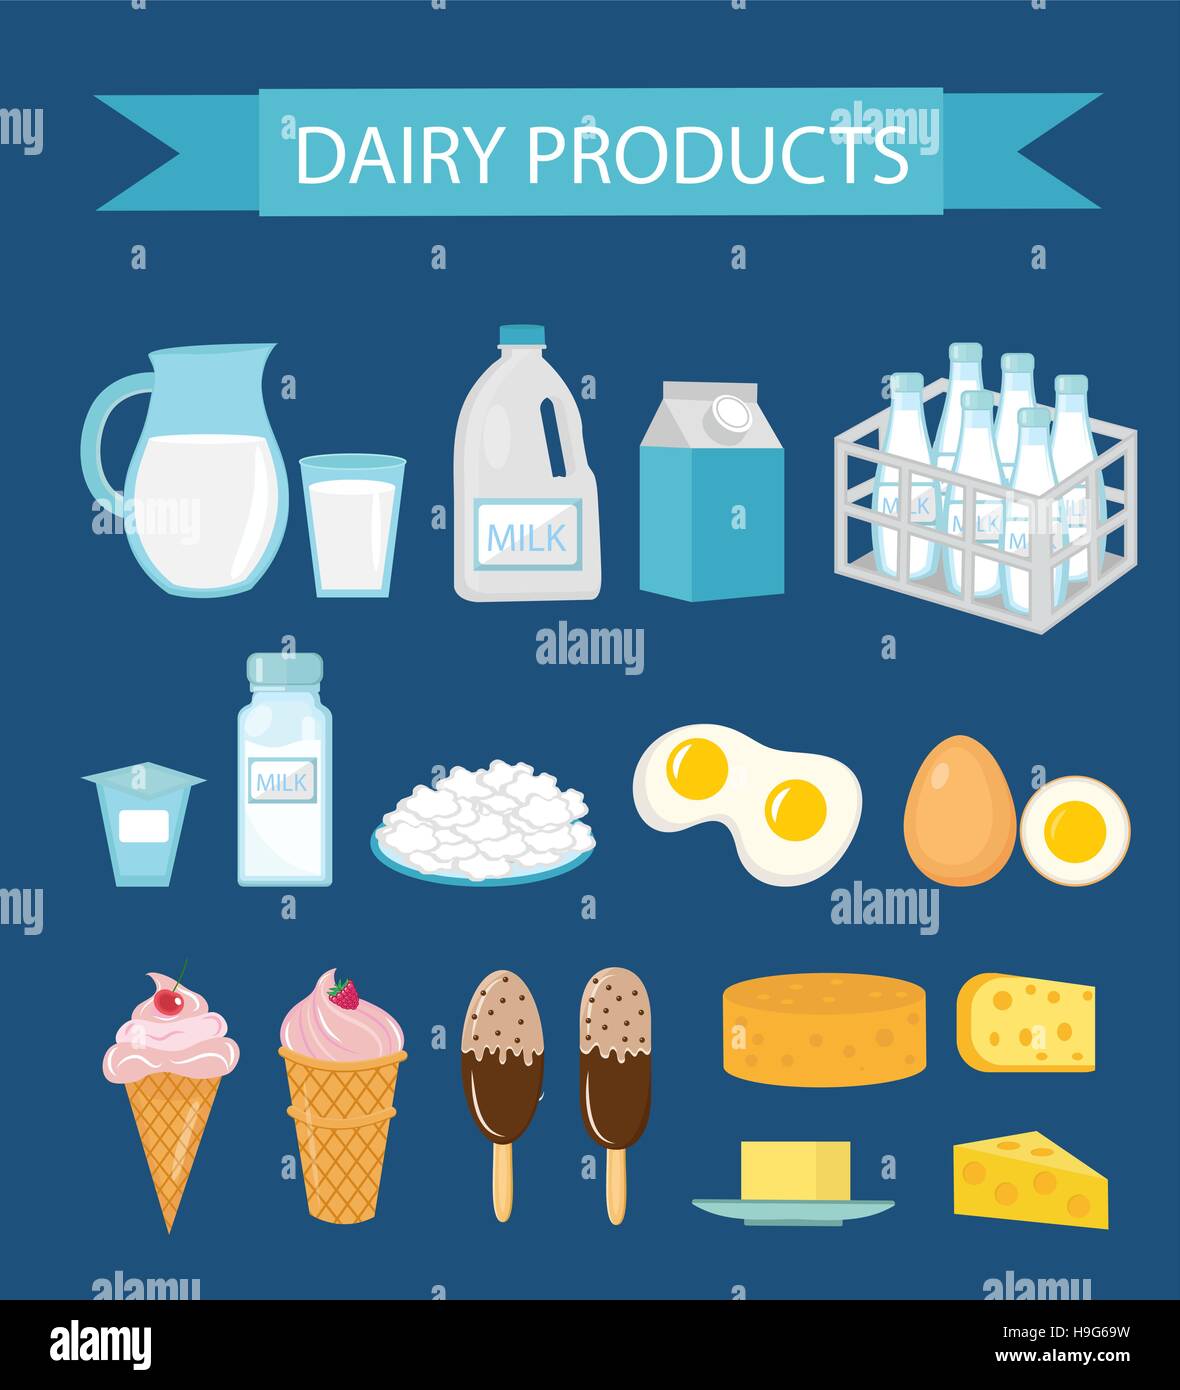 Dairy products icon set, flat style. Milk and Cheese collection. Farm foods. Vector illustration Stock Vector